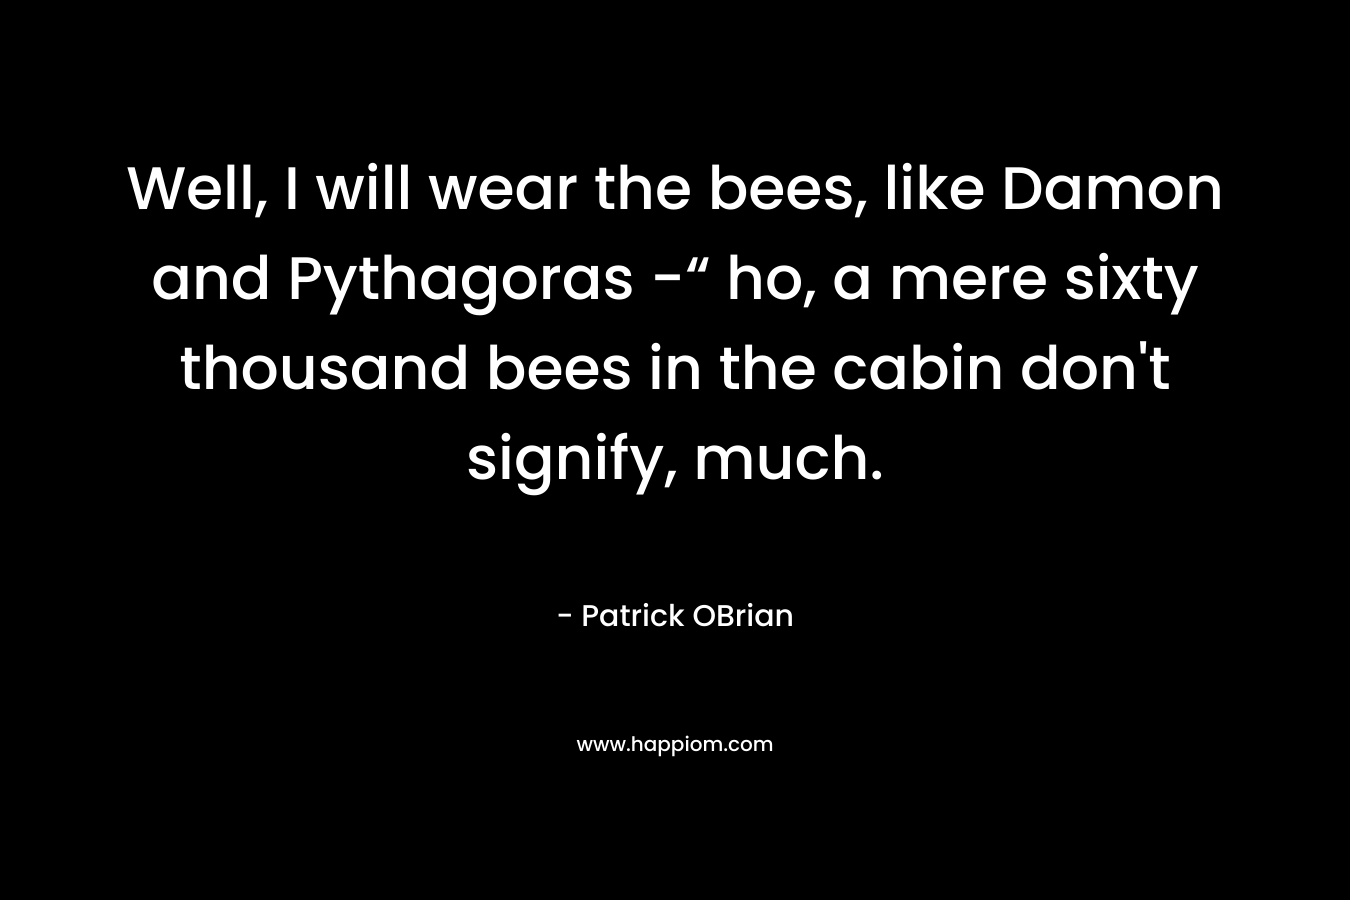 Well, I will wear the bees, like Damon and Pythagoras -“ ho, a mere sixty thousand bees in the cabin don’t signify, much. – Patrick OBrian